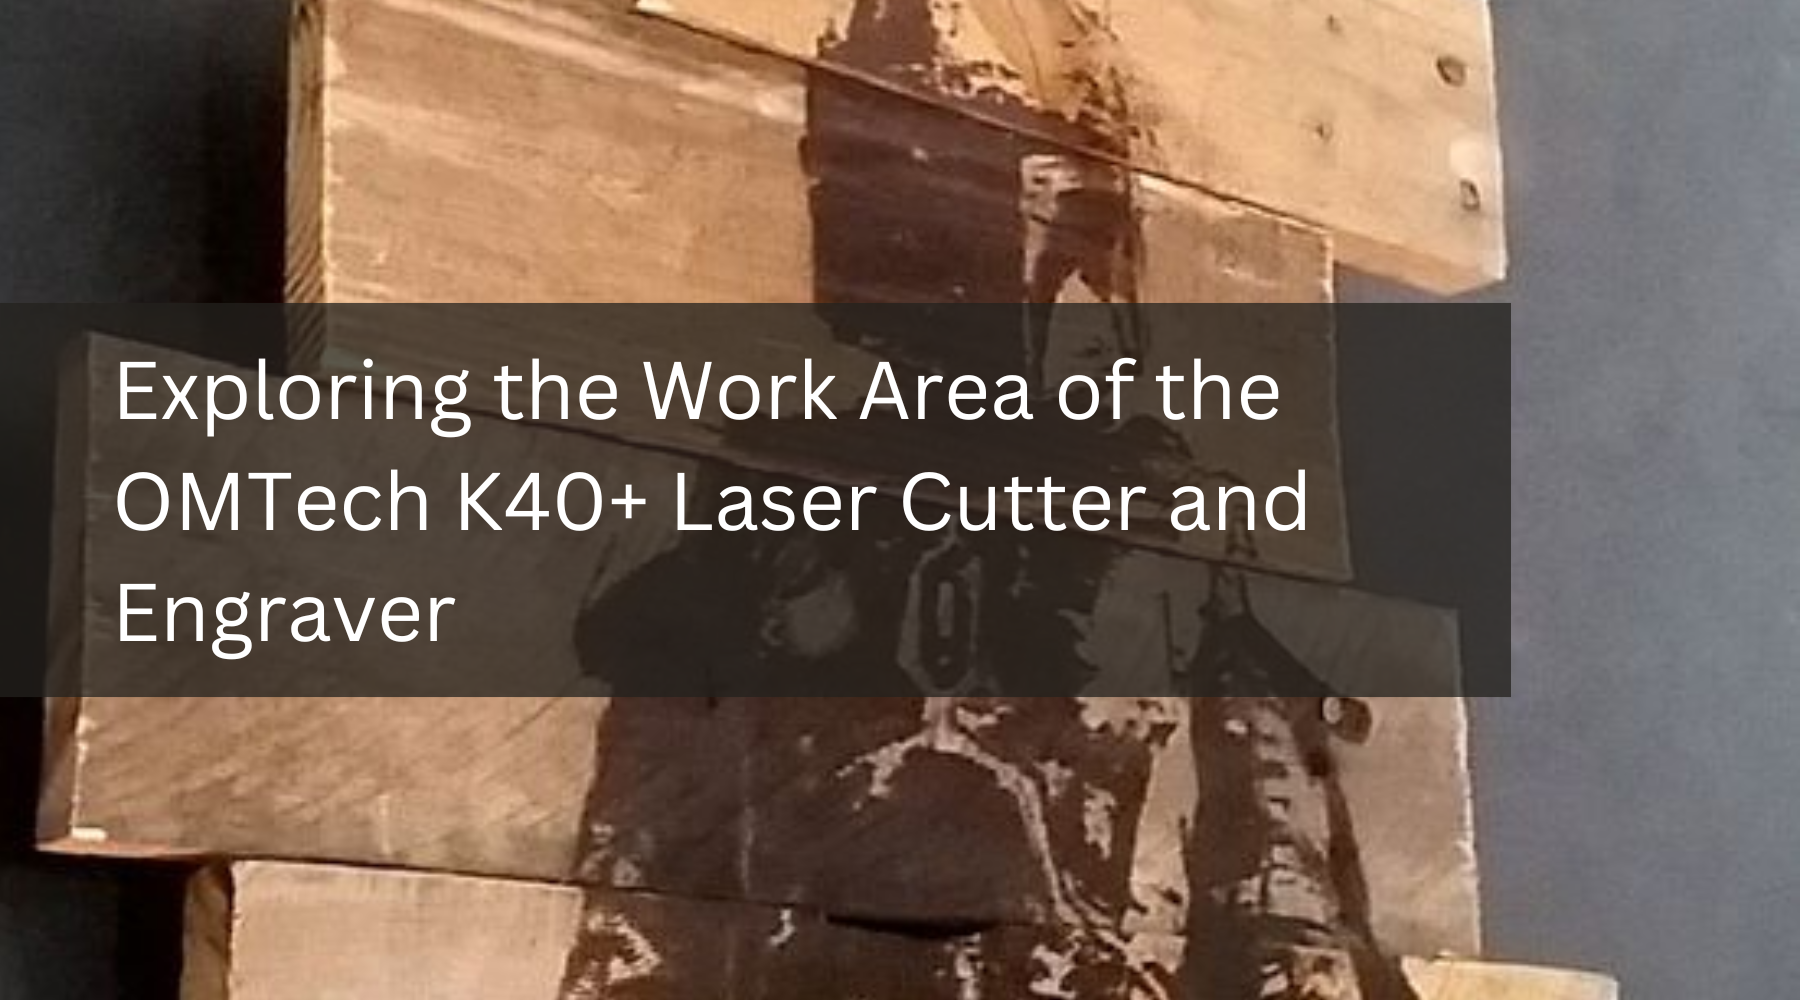 Exploring the Work Area of the OMTech K40+ Laser Cutter and Engraver